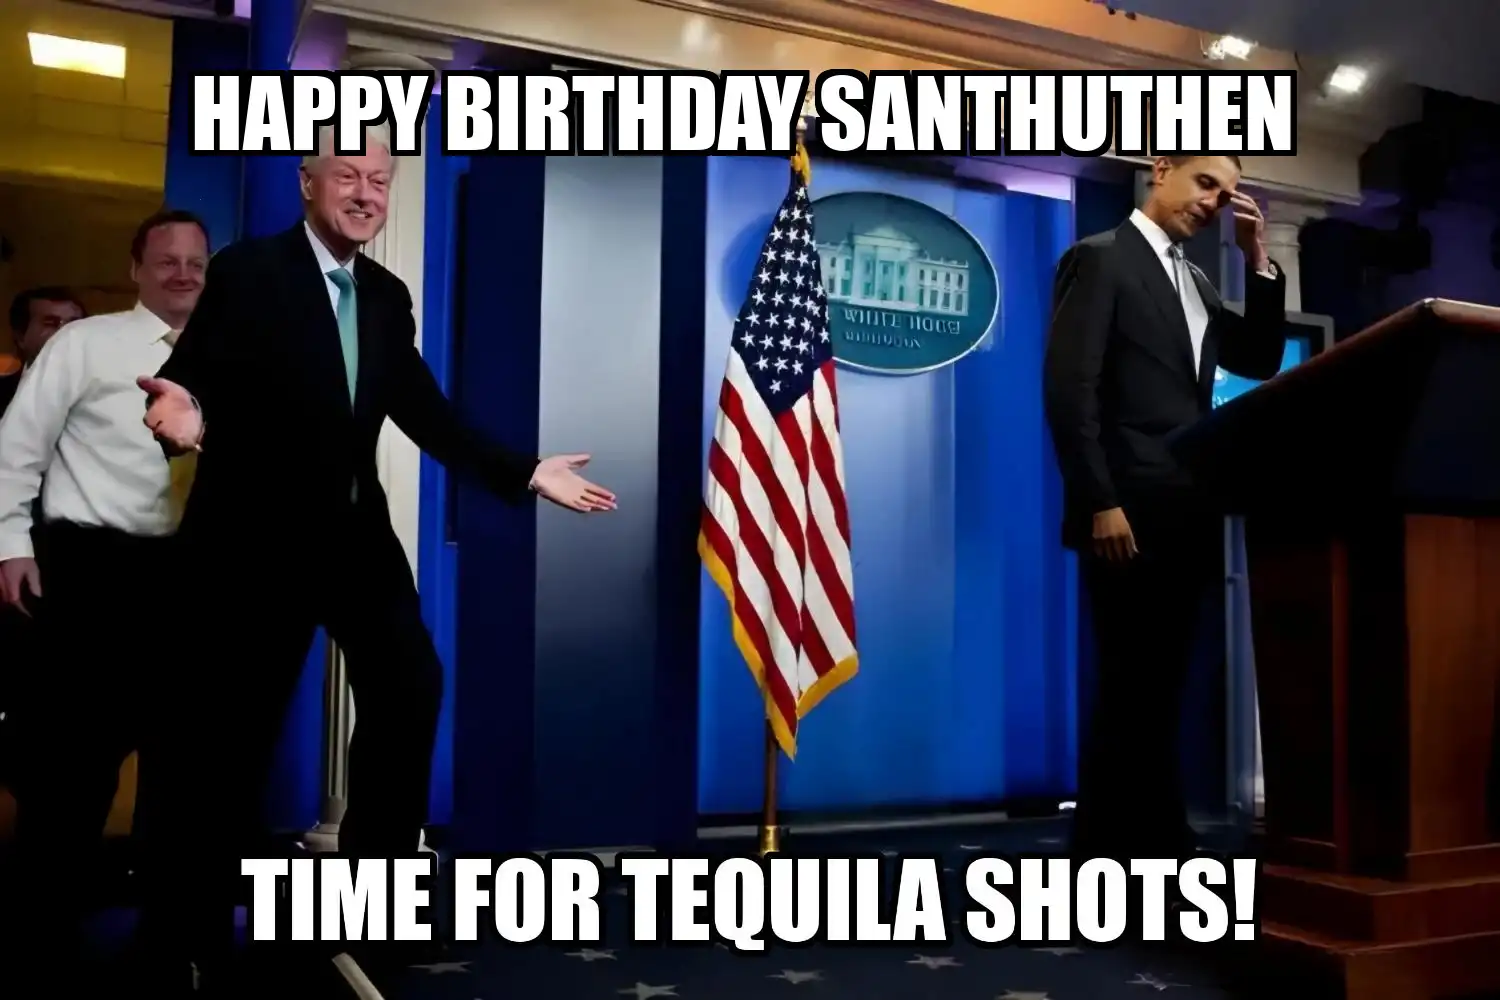 Happy Birthday Santhuthen Time For Tequila Shots Memes